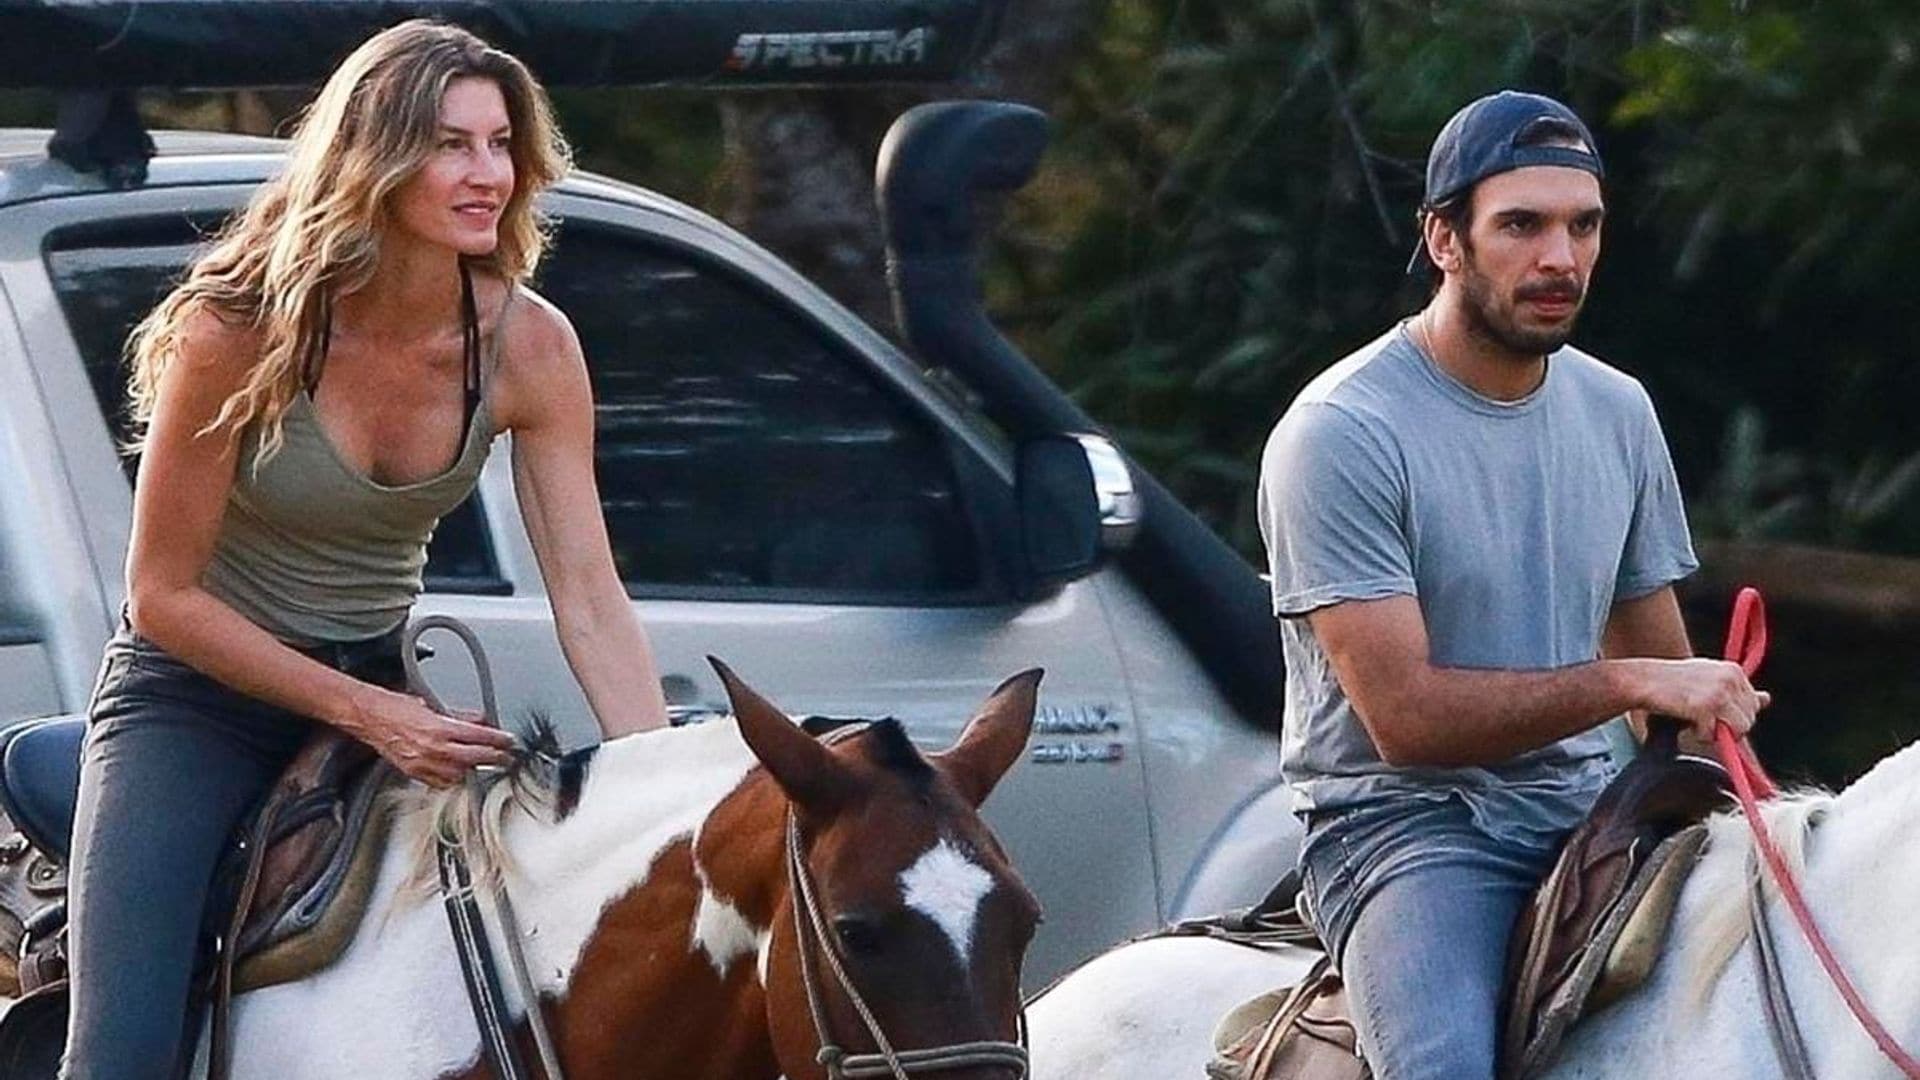 Gisele Bündchen is back in Costa Rica with her trainer Joaquim Valente